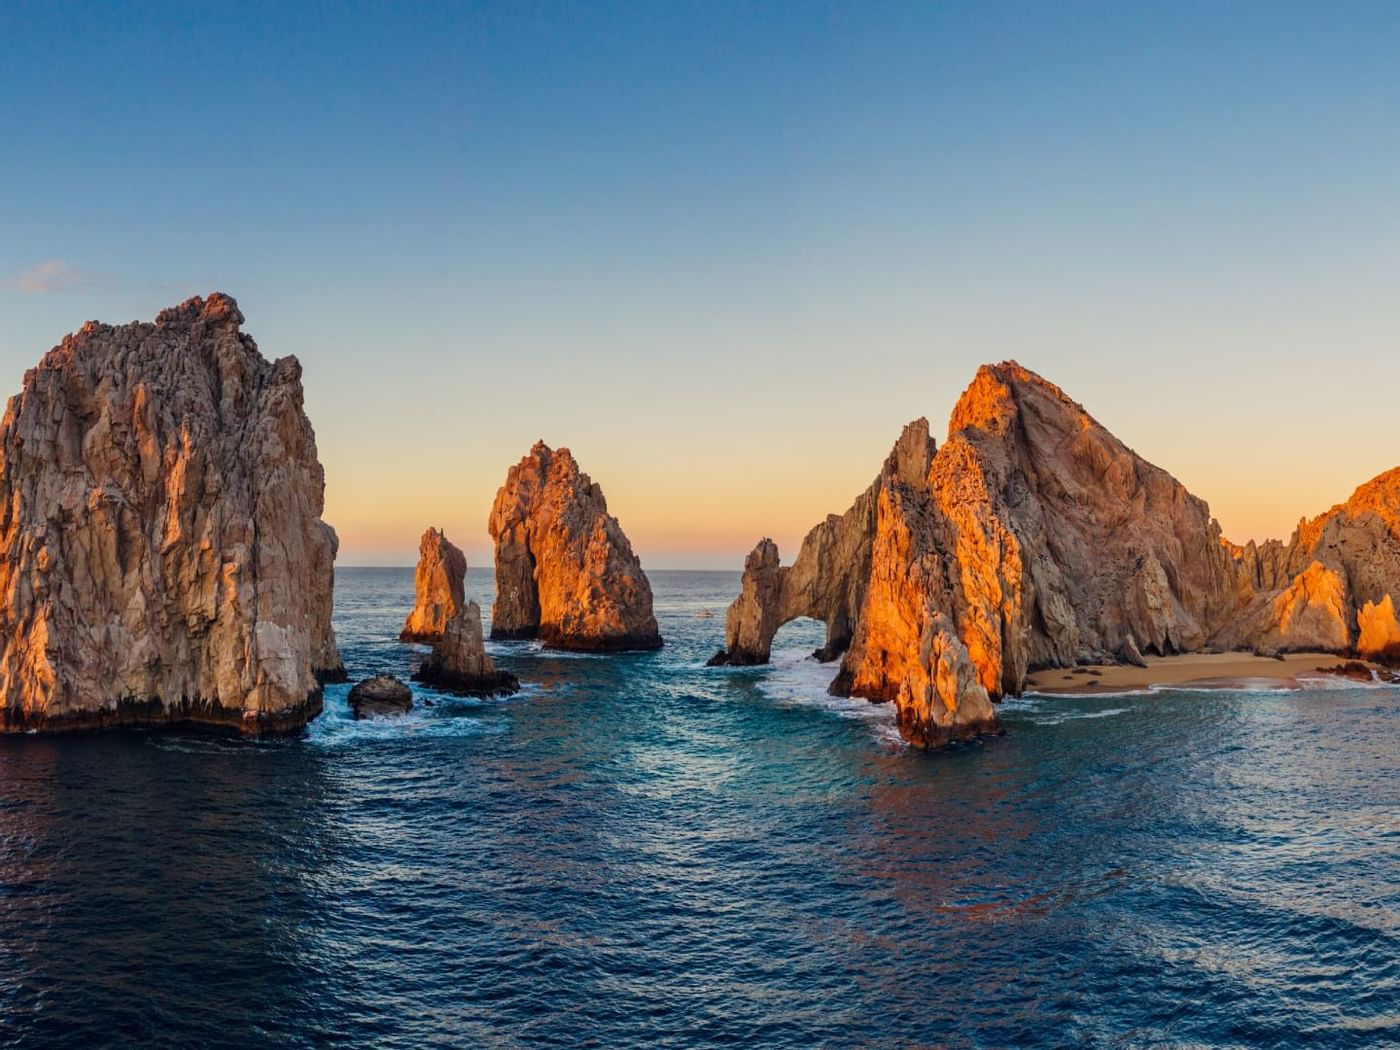 The Arch of Cabo San Lucas on a sunny day near Gamma Hotels